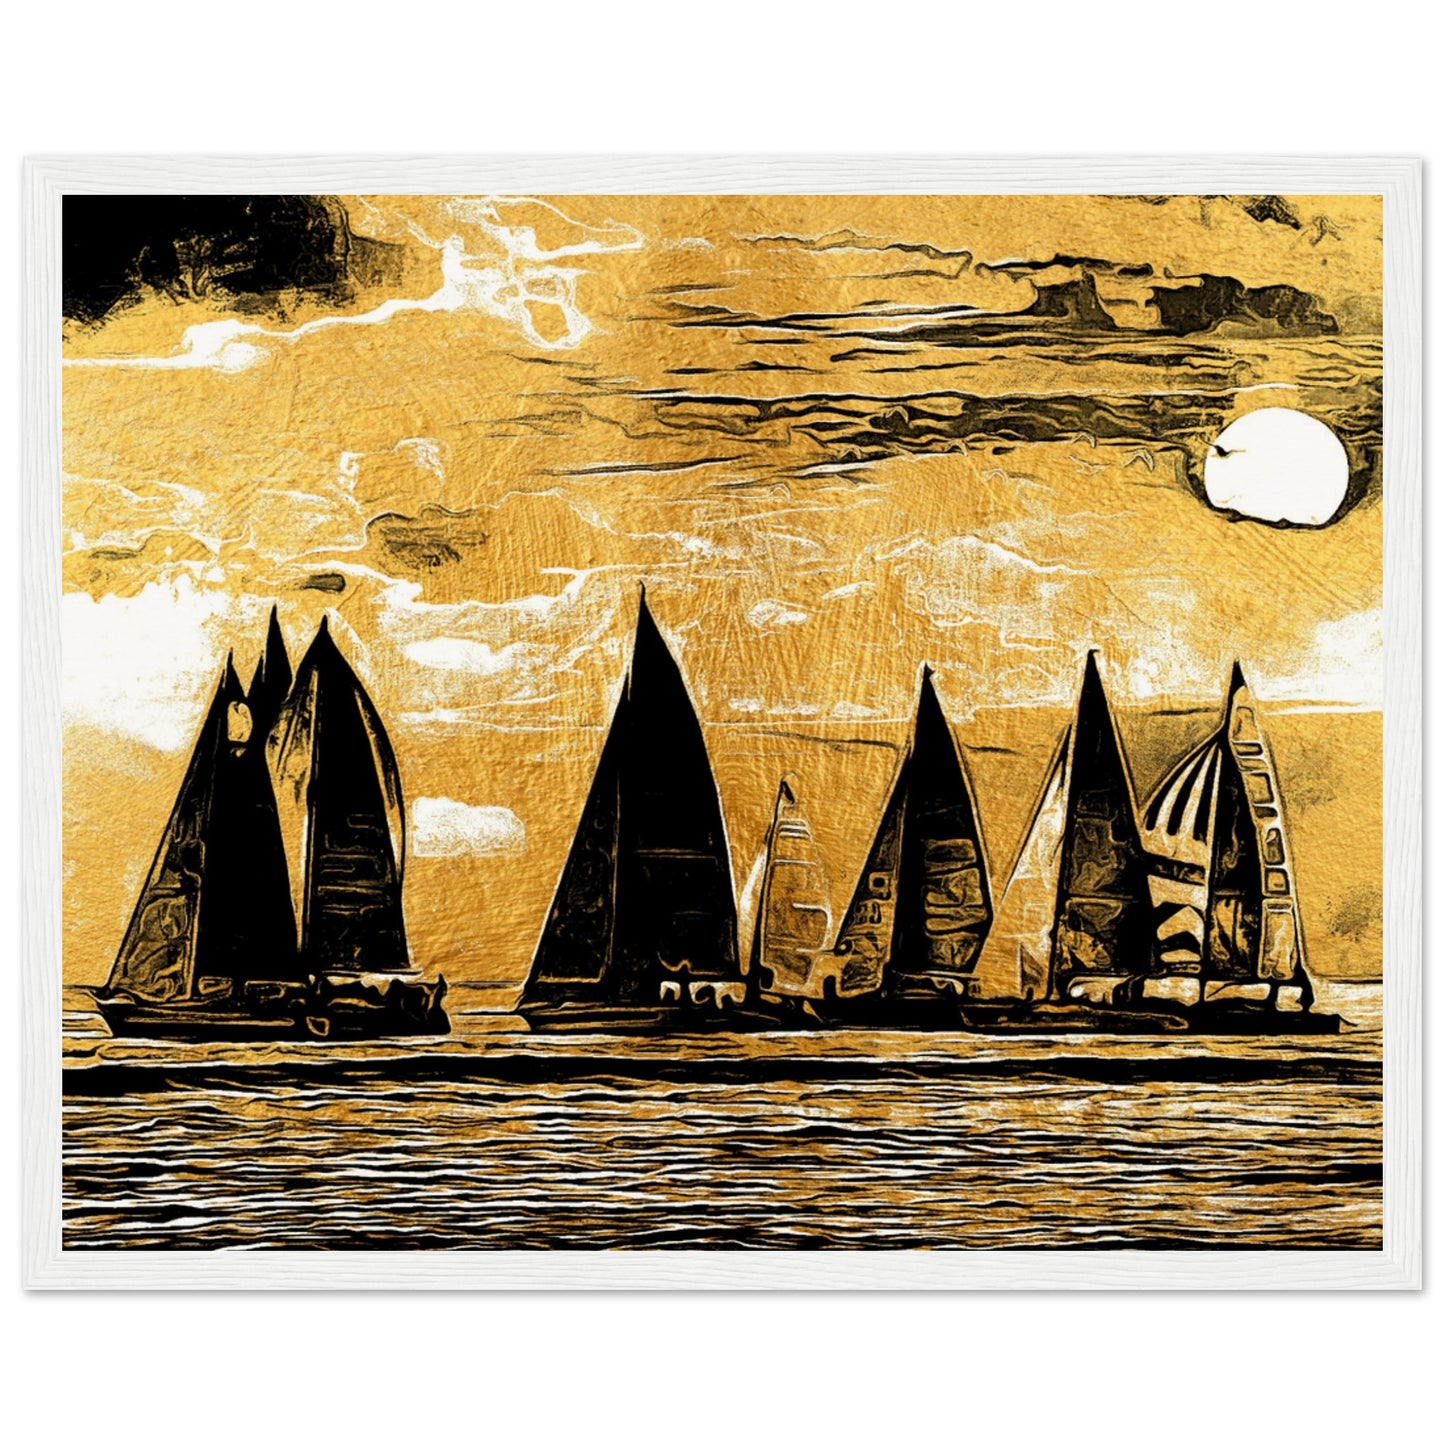 Sailing with a golden sunset